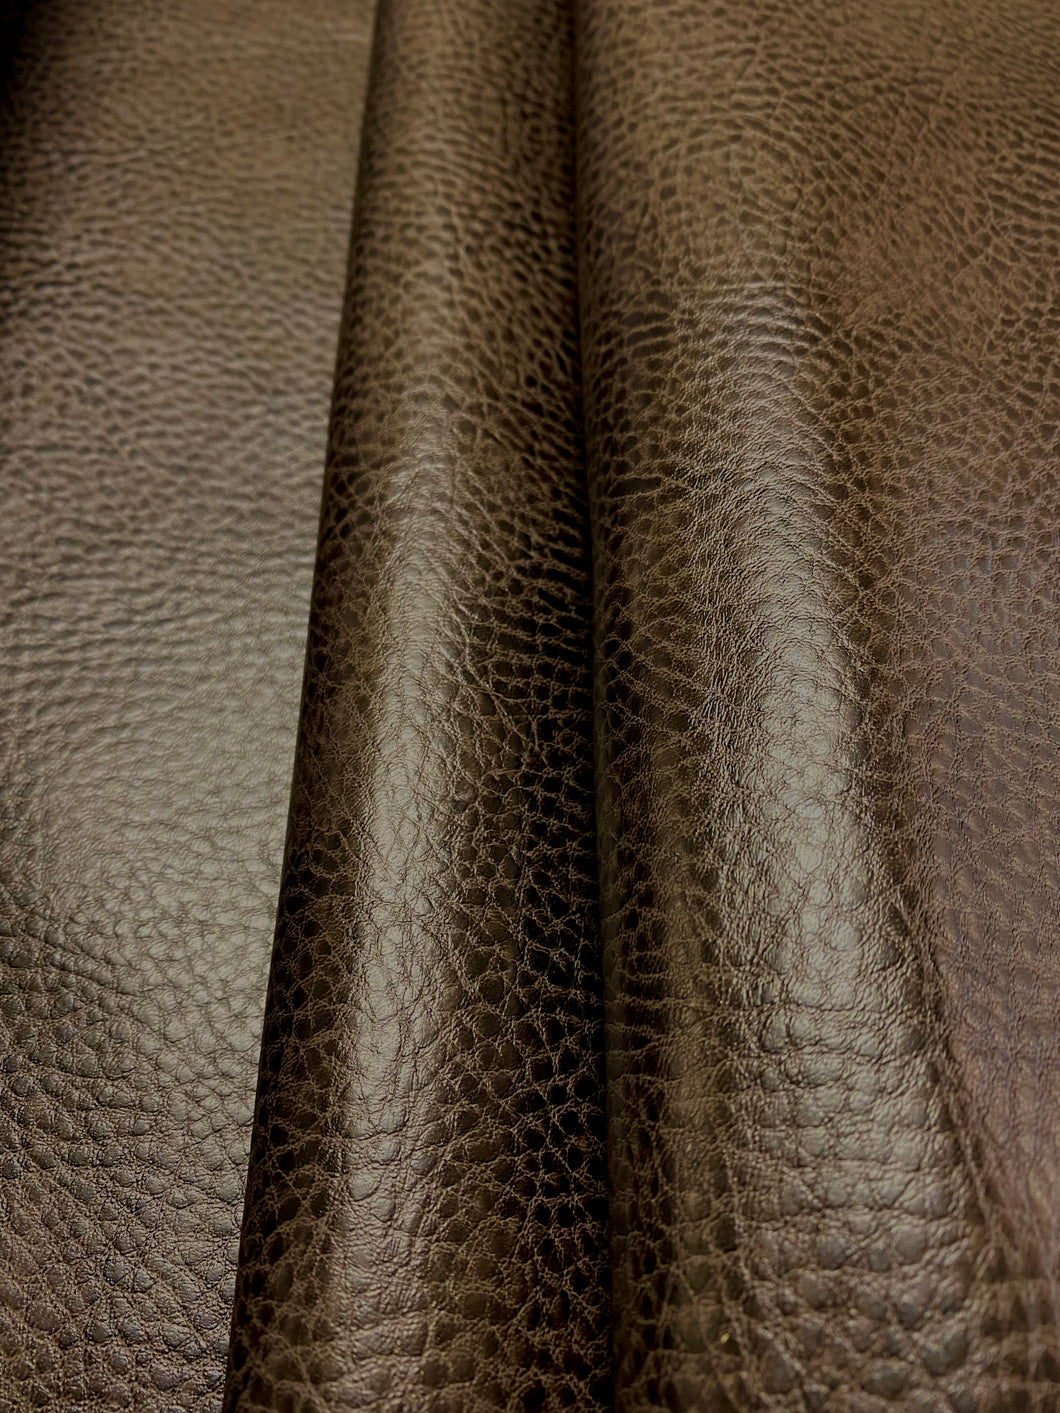 Animal Pattern Pearlescent Faux Leather Vinyl, Fabric Bistro, Columbia